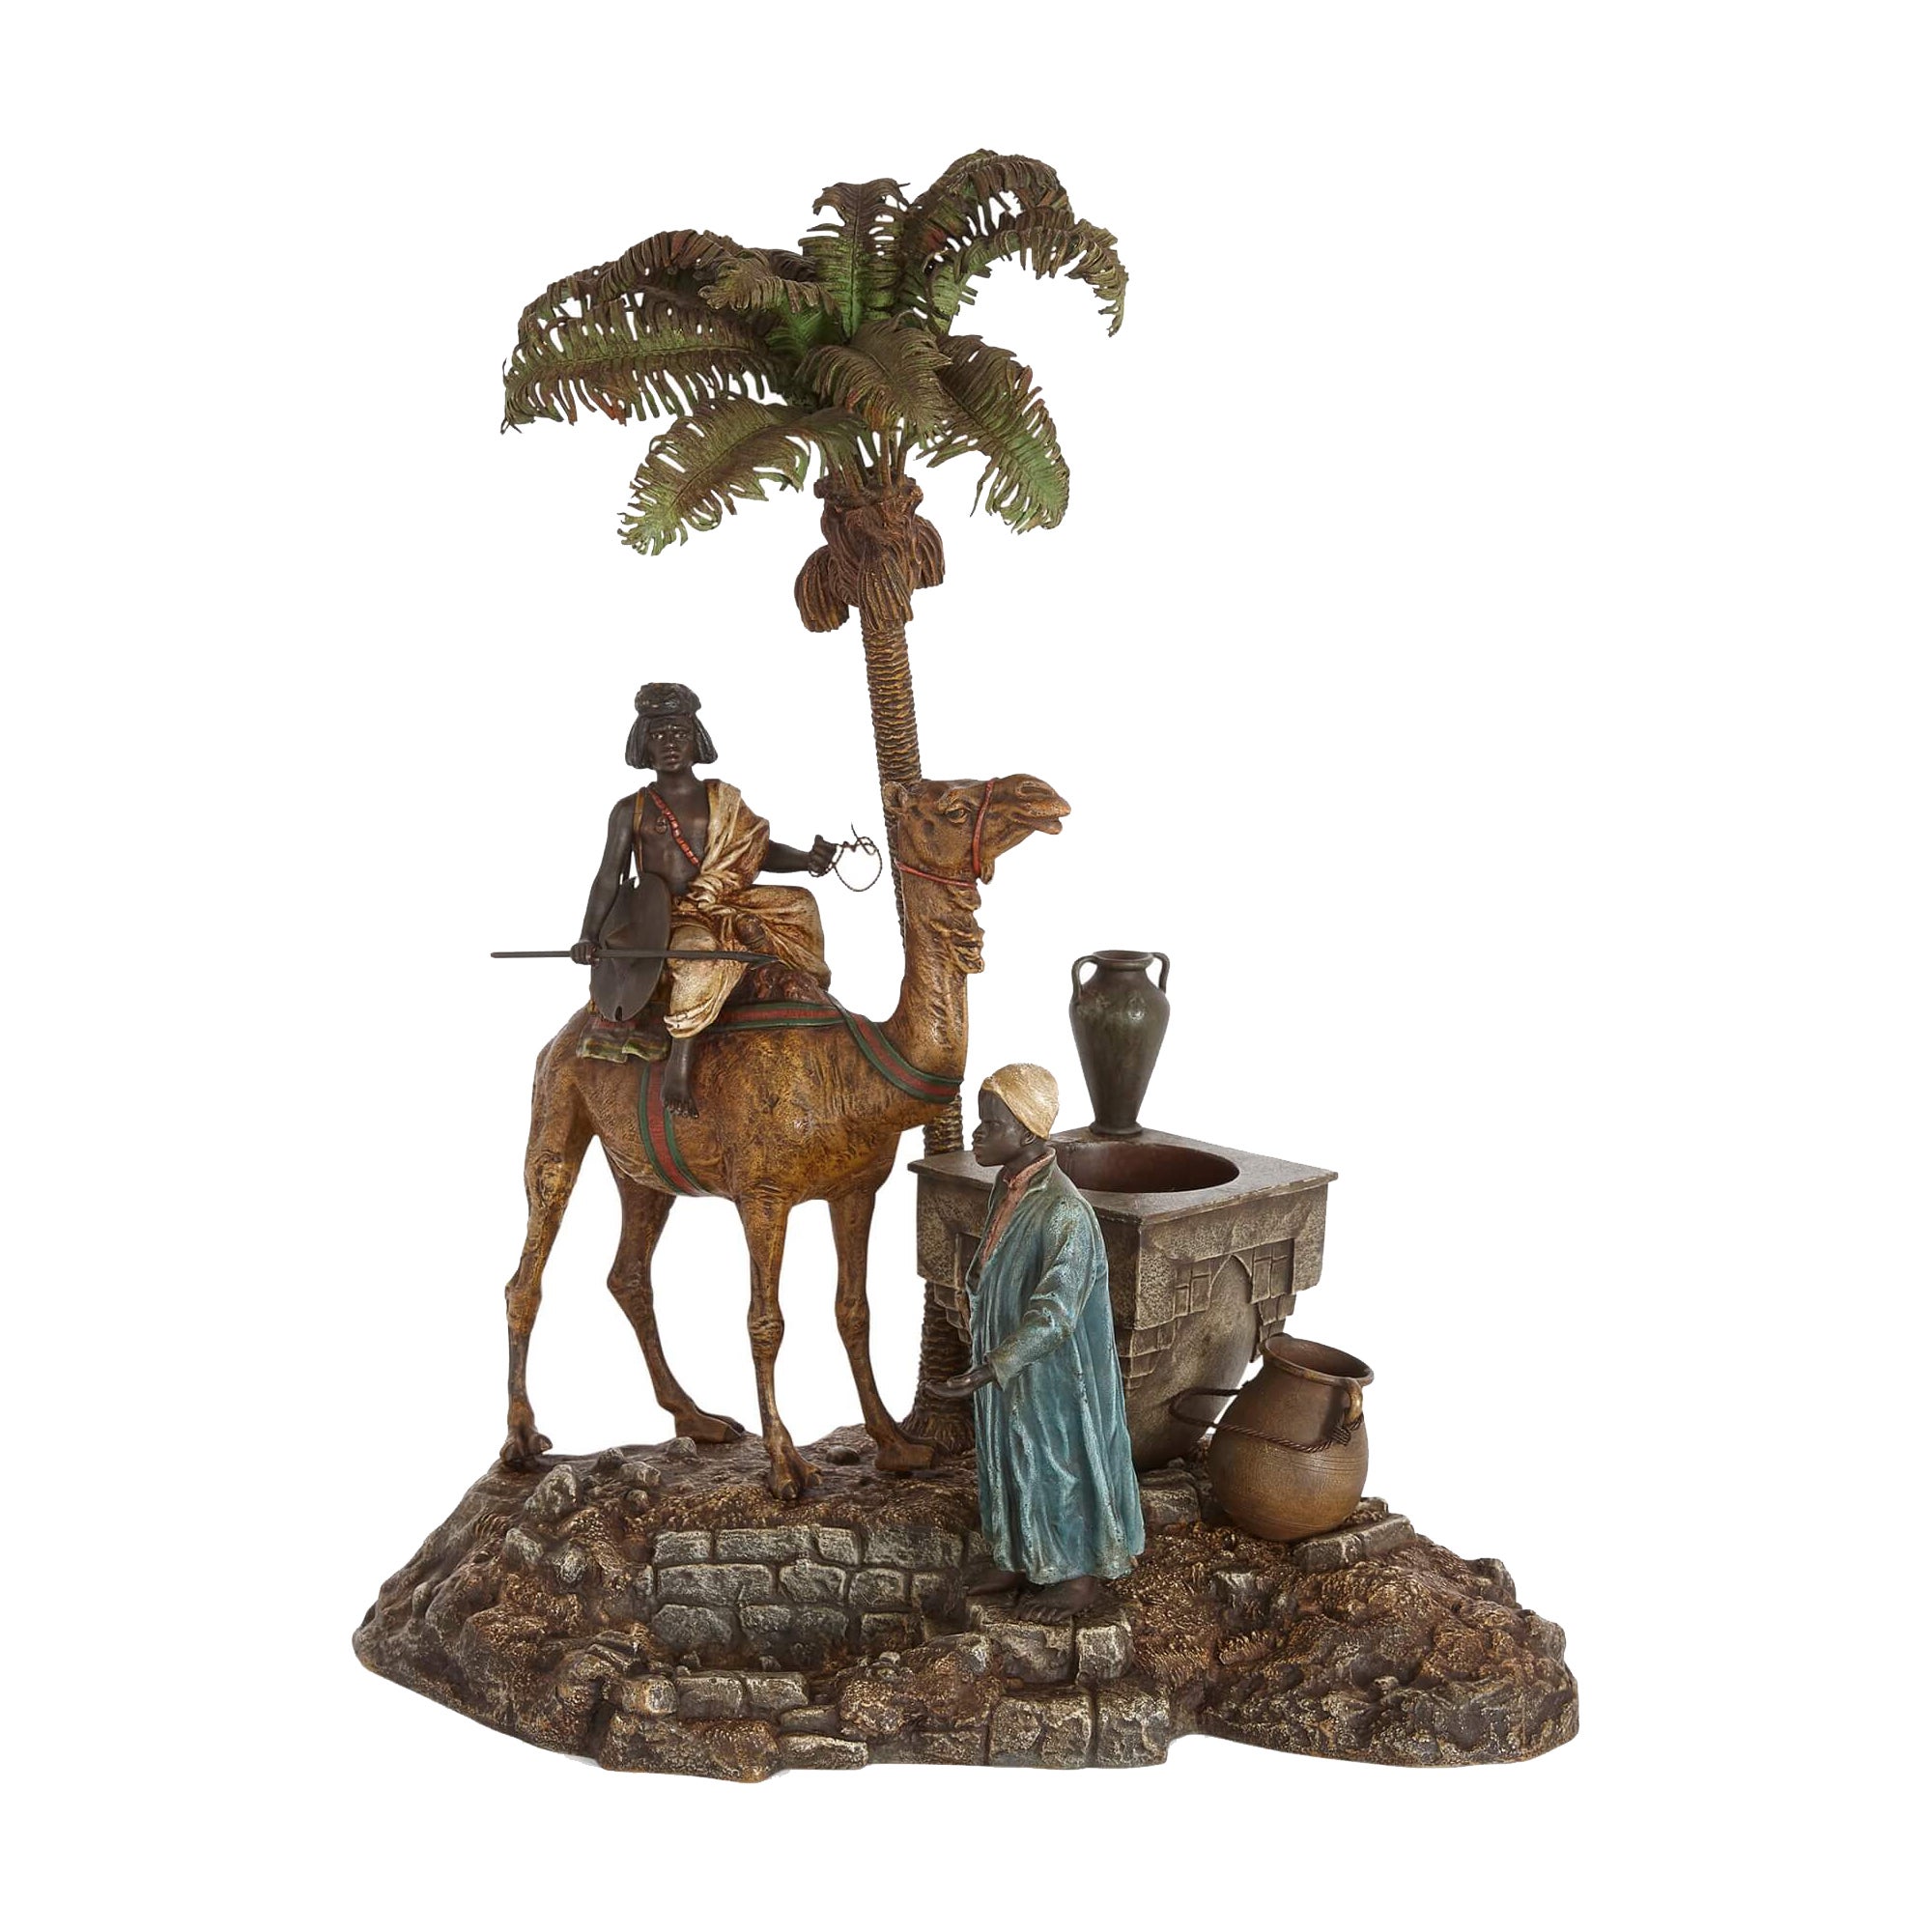 Antique Viennese Cold-Painted Bronze Sculpture with a Camel by Bergman For Sale